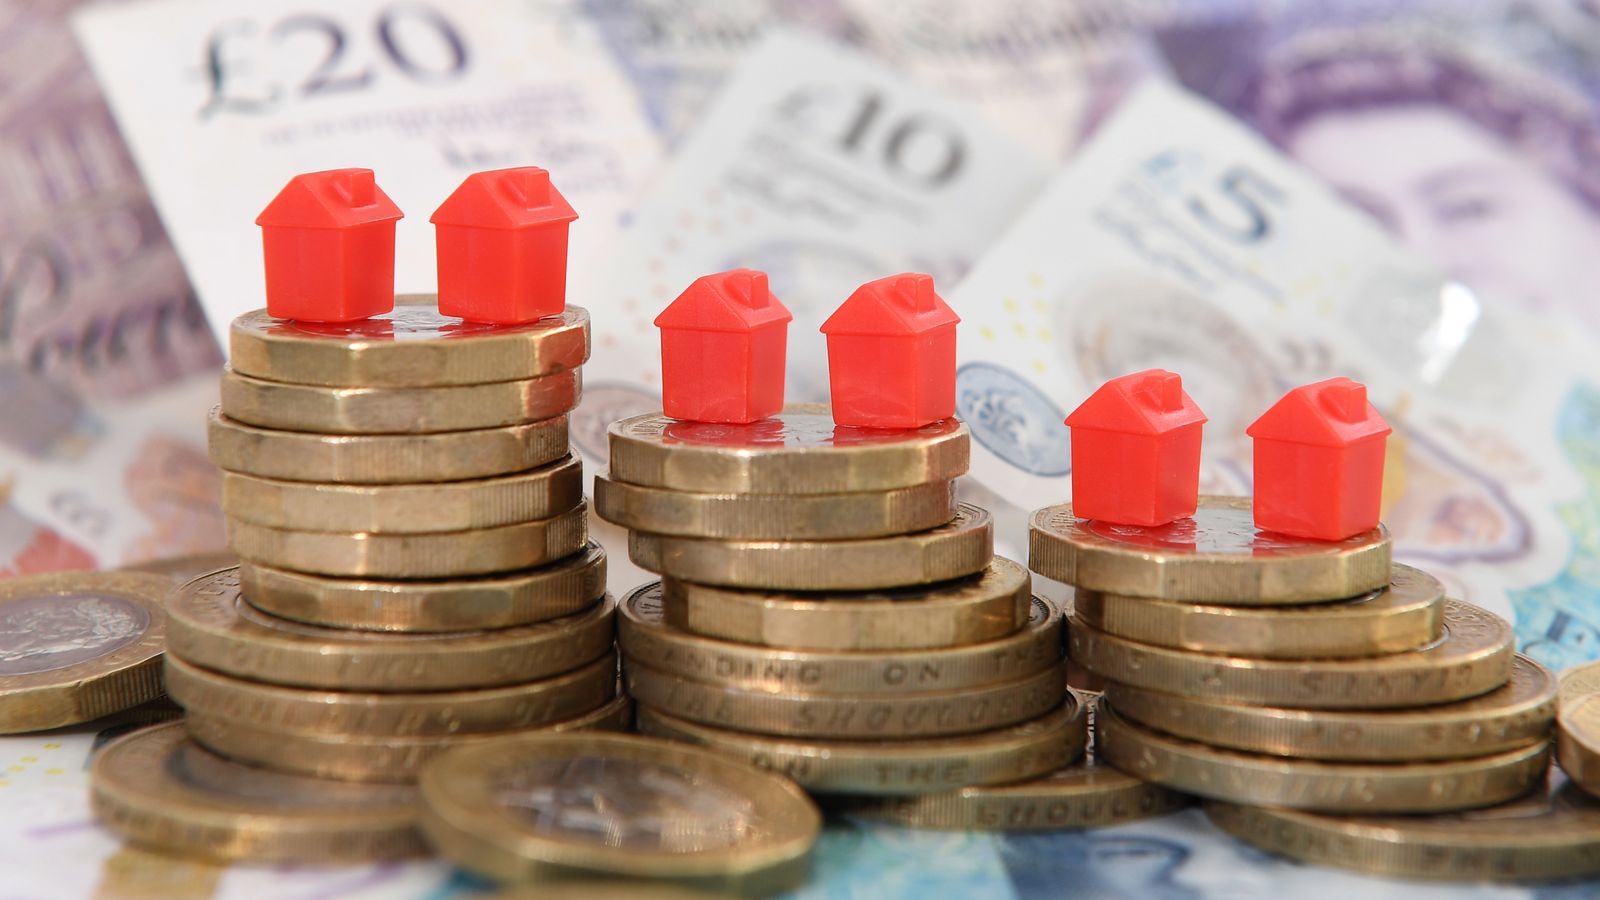 labour wants 25-year fixed-rate mortgages across the uk. who do they benefit most?